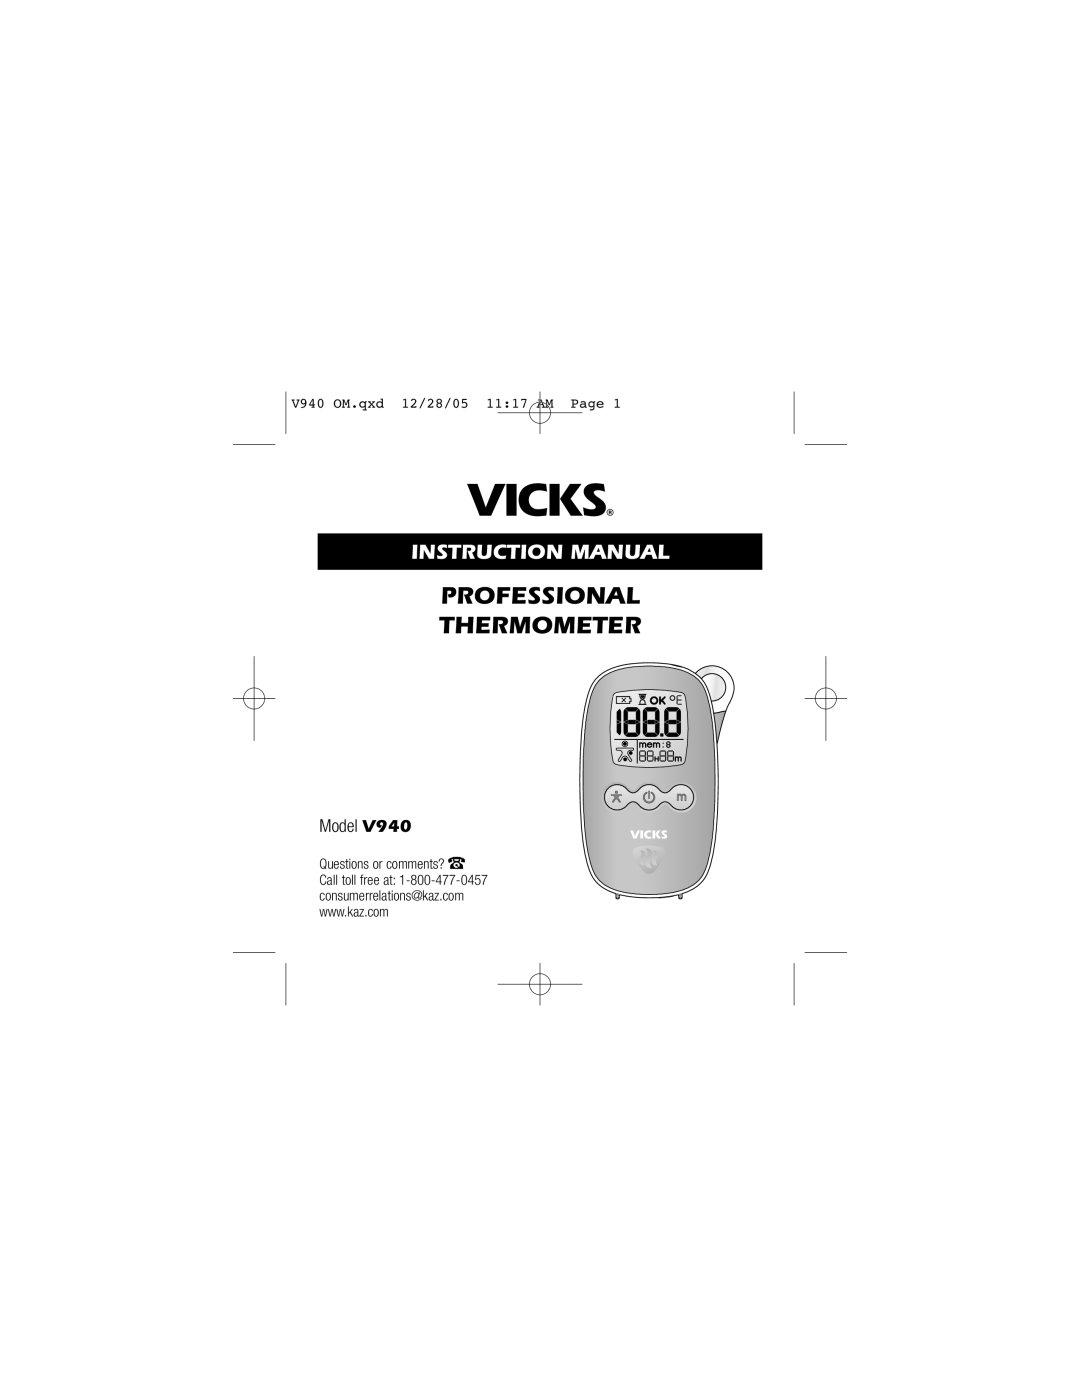 Vicks instruction manual Instruction Manual, V940 OM.qxd 12/28/05 1117 AM Page, Professional Thermometer, Model 